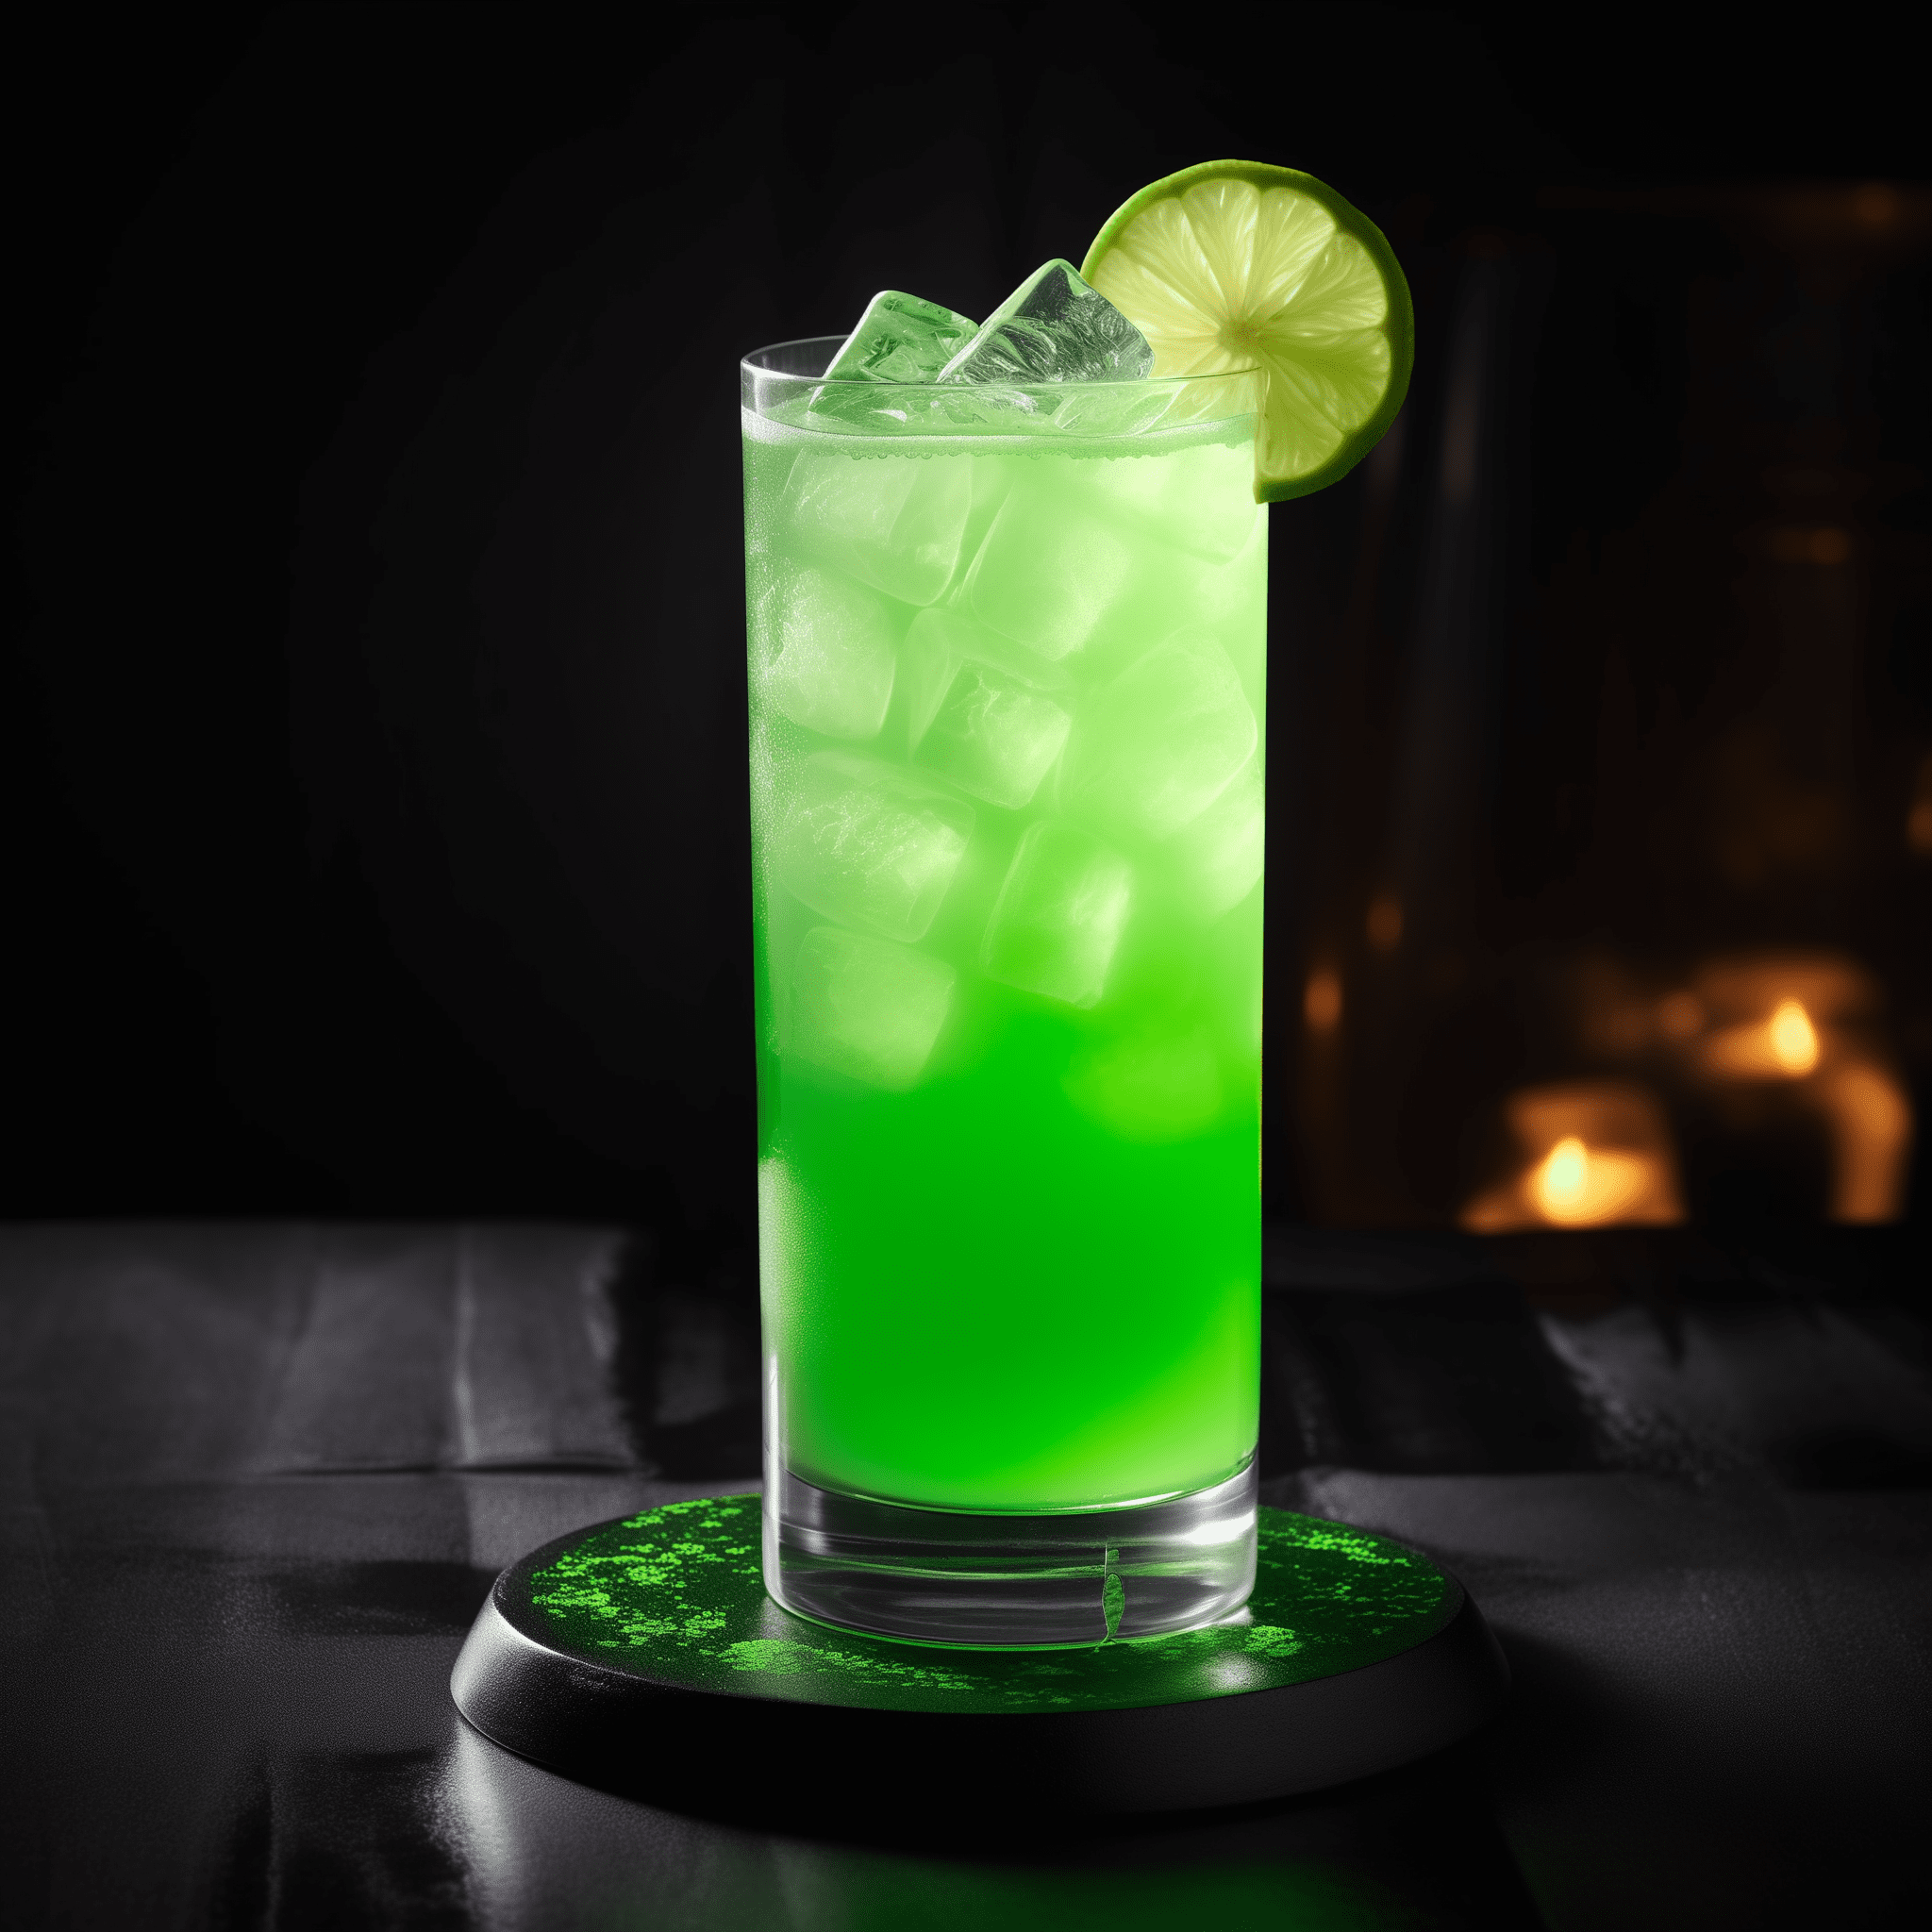 Kryptonite Cocktail Recipe - The Kryptonite cocktail is a delightful mix of sweet and fruity flavors with a coconut twist. It's quite strong, thanks to the overproof rum, but the sweetness of the pineapple juice and melon liqueur balance it out, making it dangerously easy to drink.